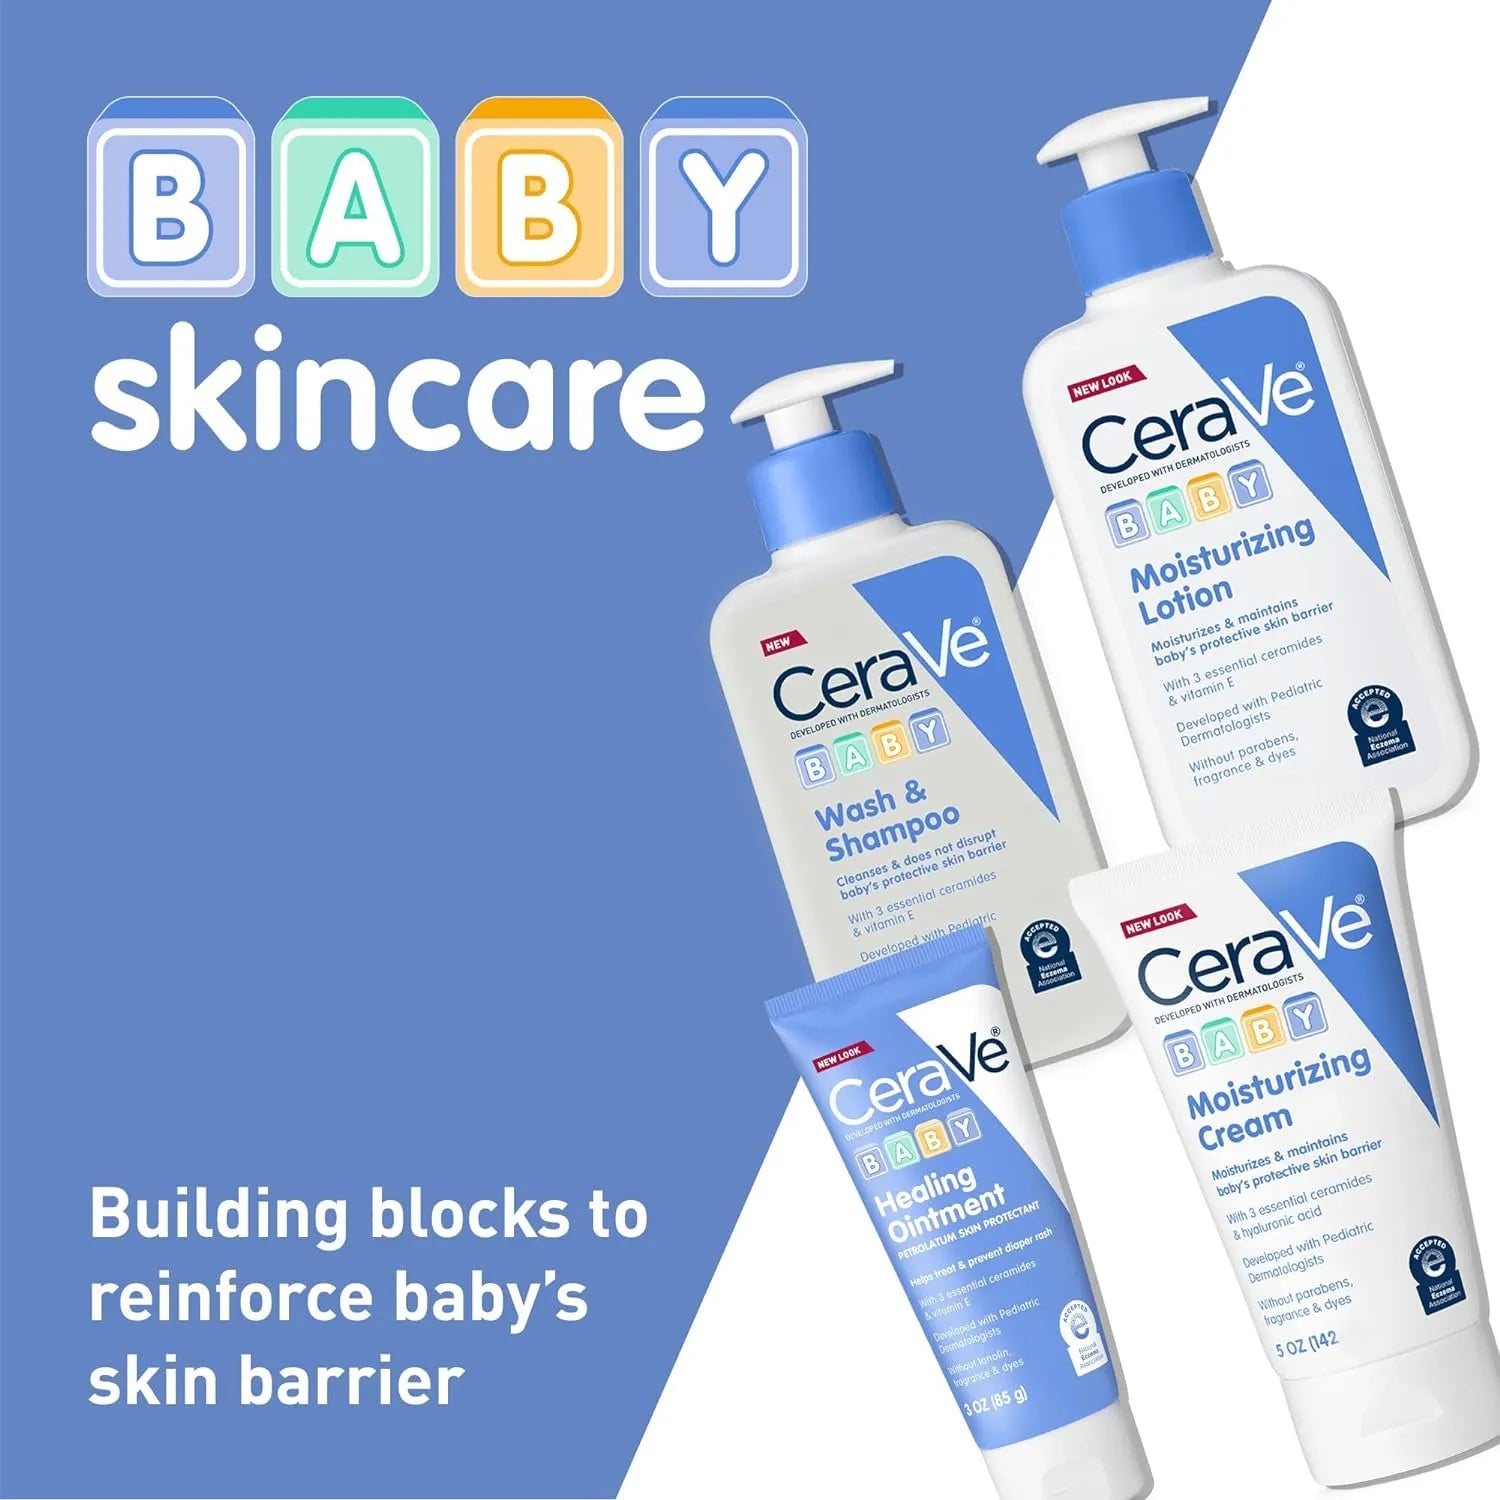 Safe for everyday use, this dermatologist-developed lotion keeps baby's skin soft & healthy. Hydrates & protects baby's delicate skin with ceramides & hyaluronic acid. CeraVe Baby Moisturizing Lotion 237ml - Gentle Care for Delicate Skin